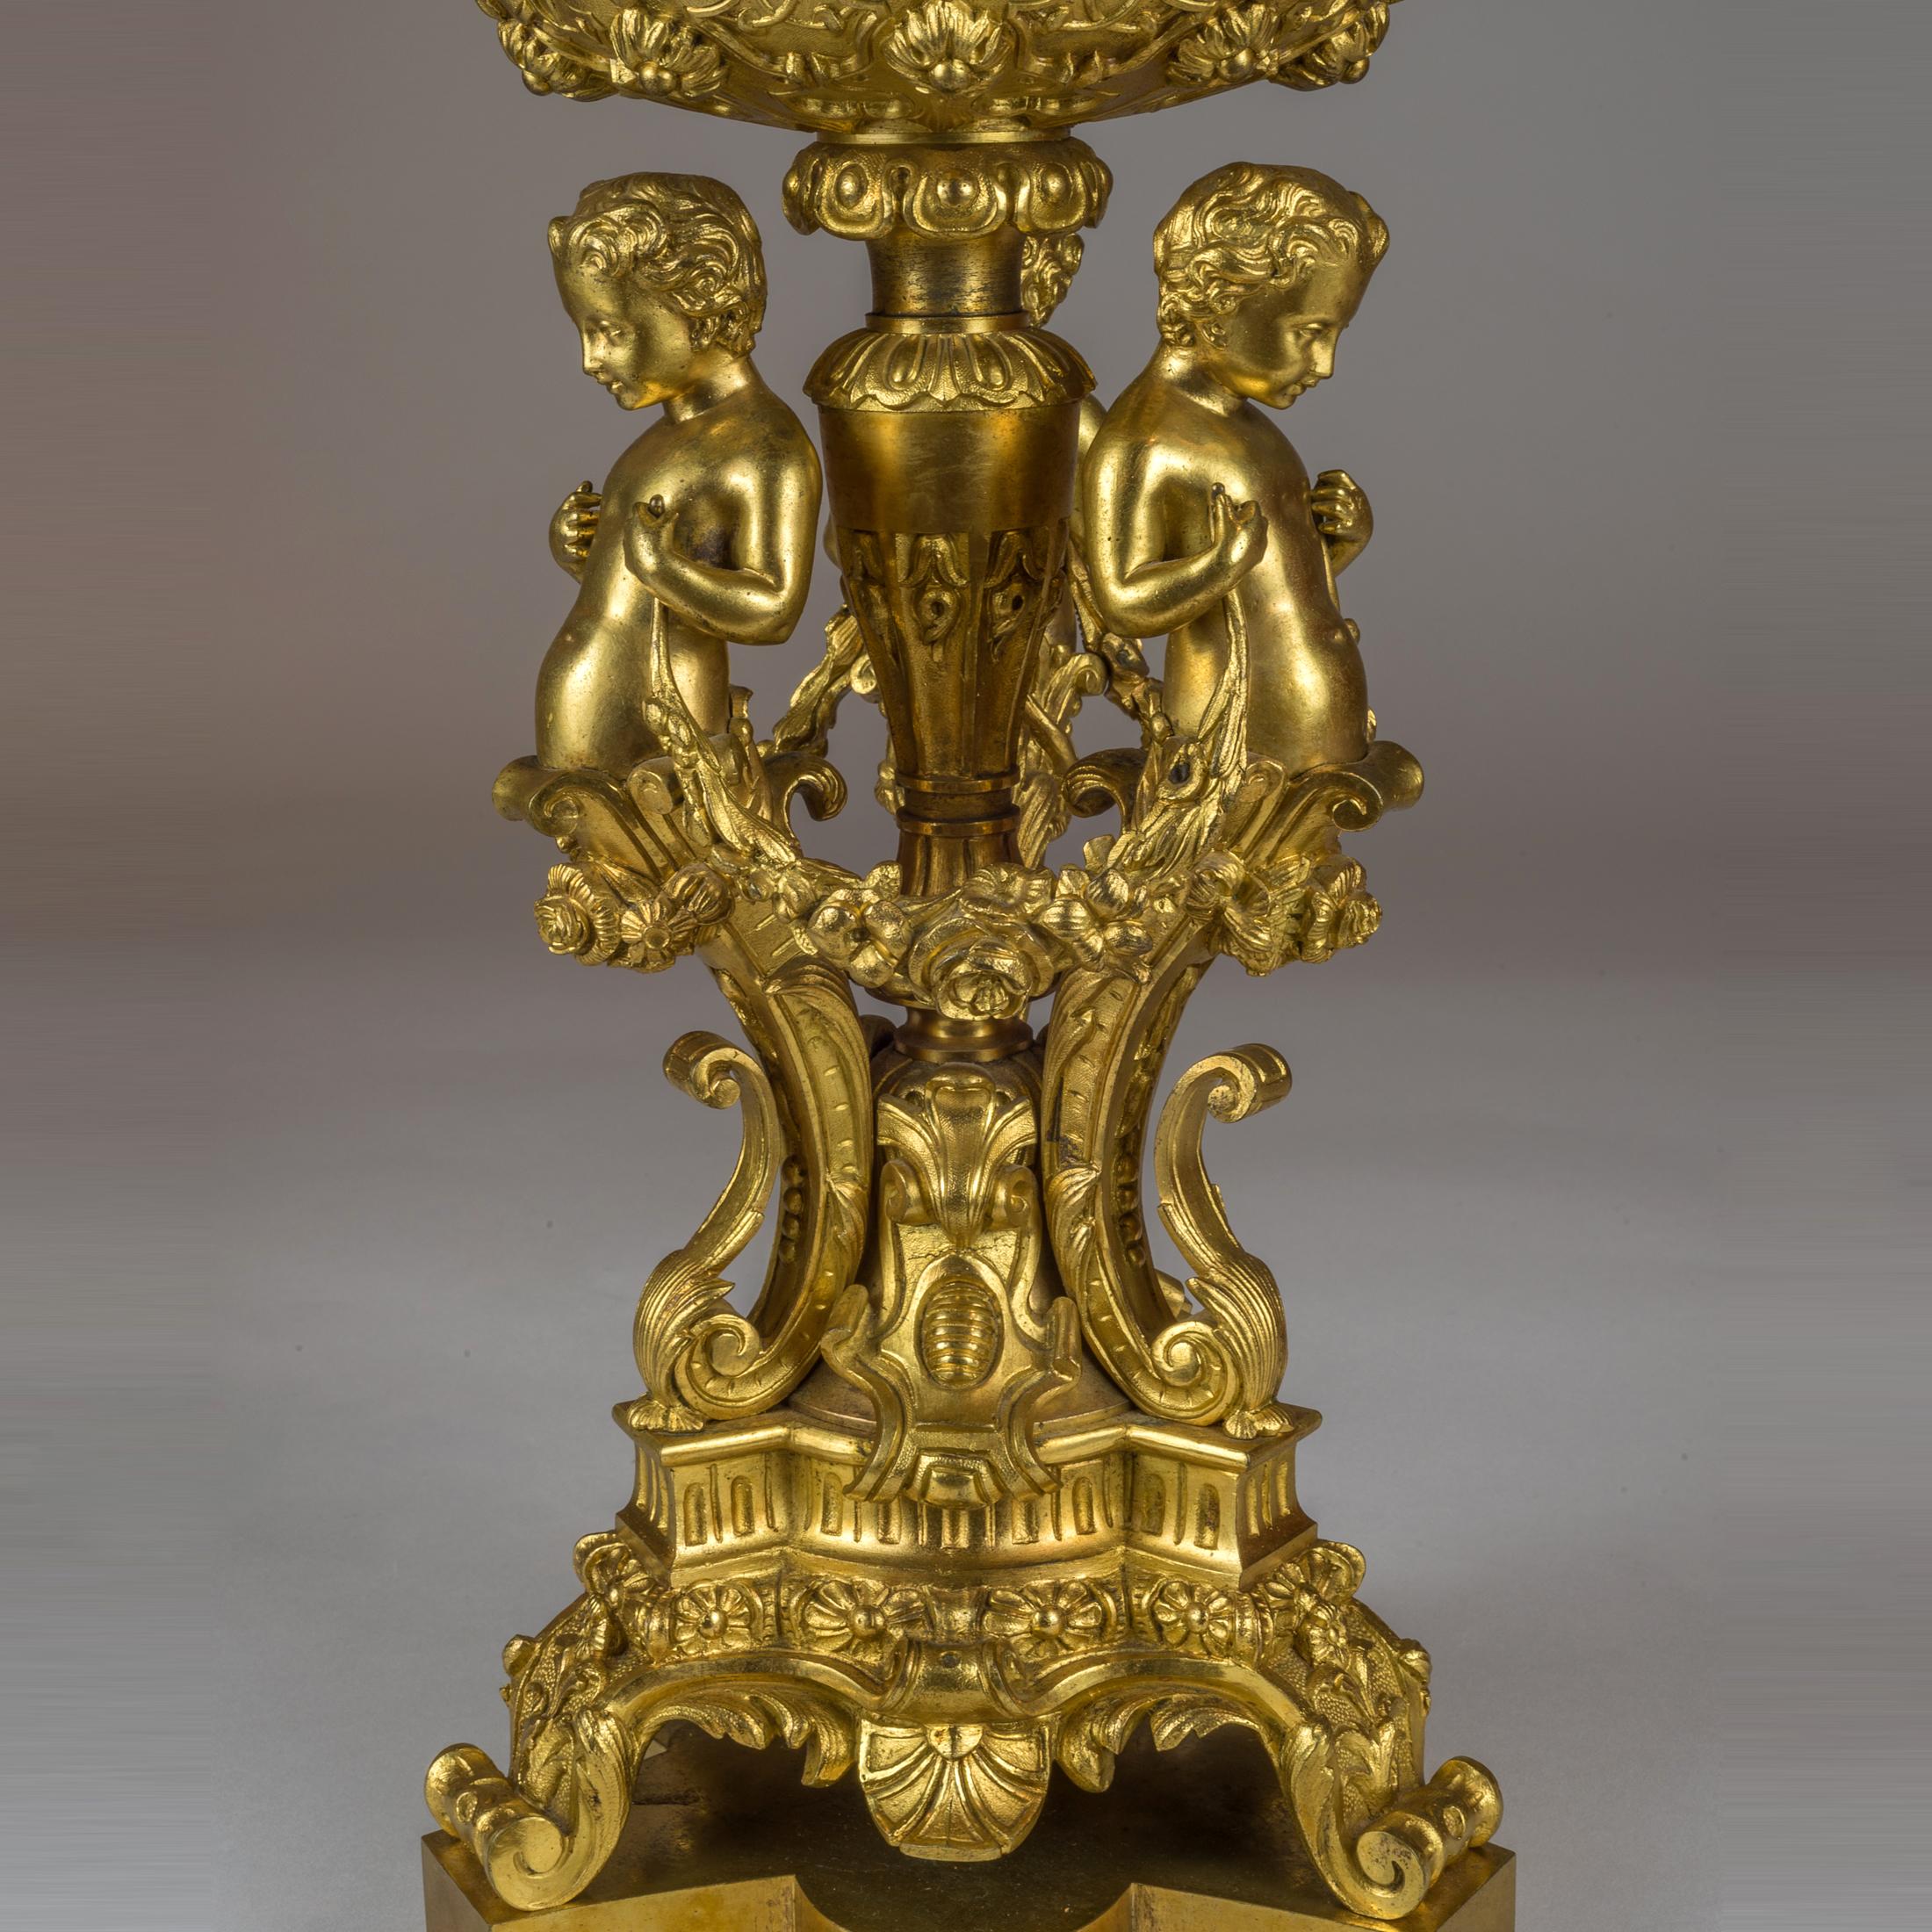 Patinated Pair of Figural Gilt Bronze Tazzas Supported by Three Cherubs For Sale